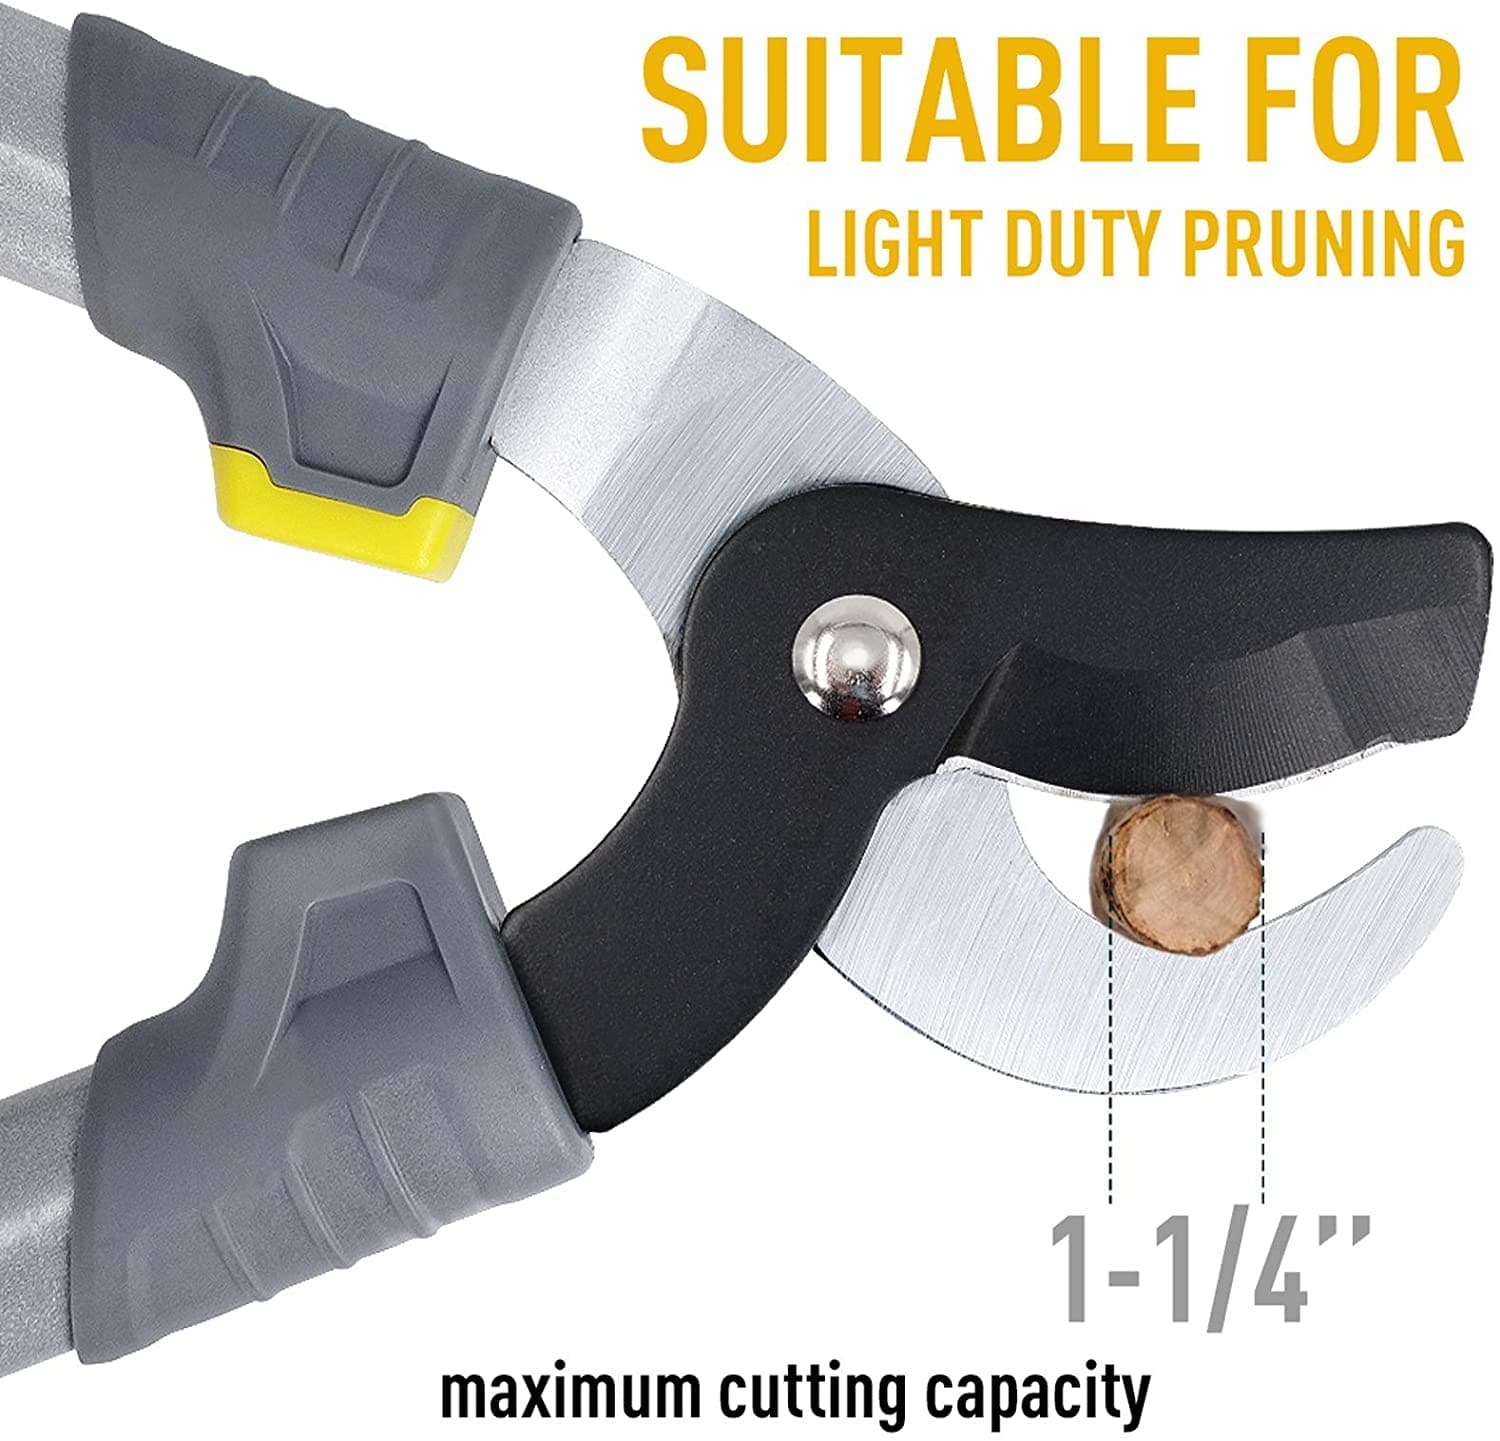 lopper tool for light duty pruning